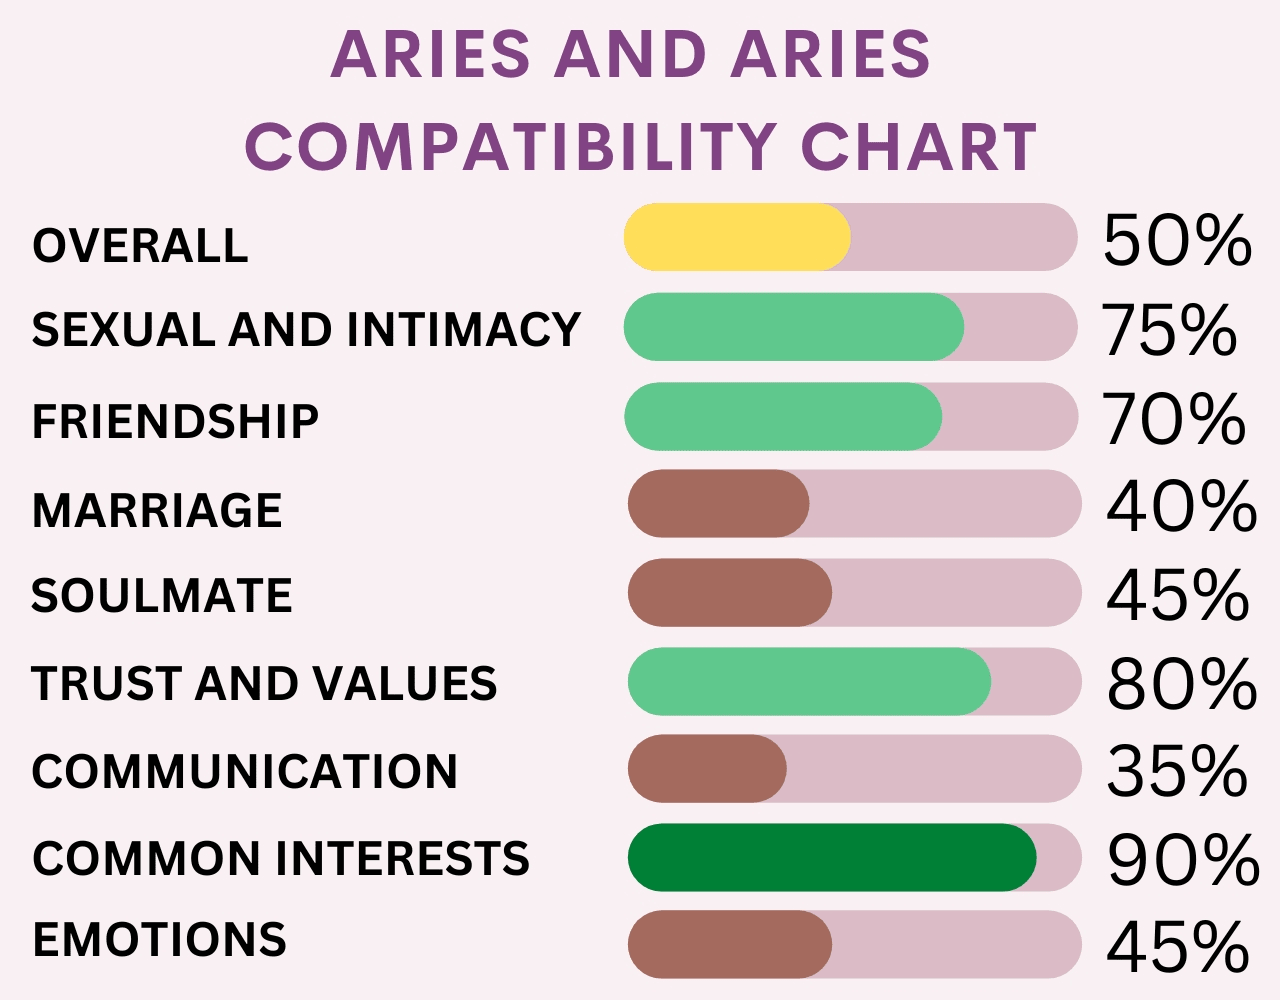 Aries and Aries Compatibility Chart with Percentages